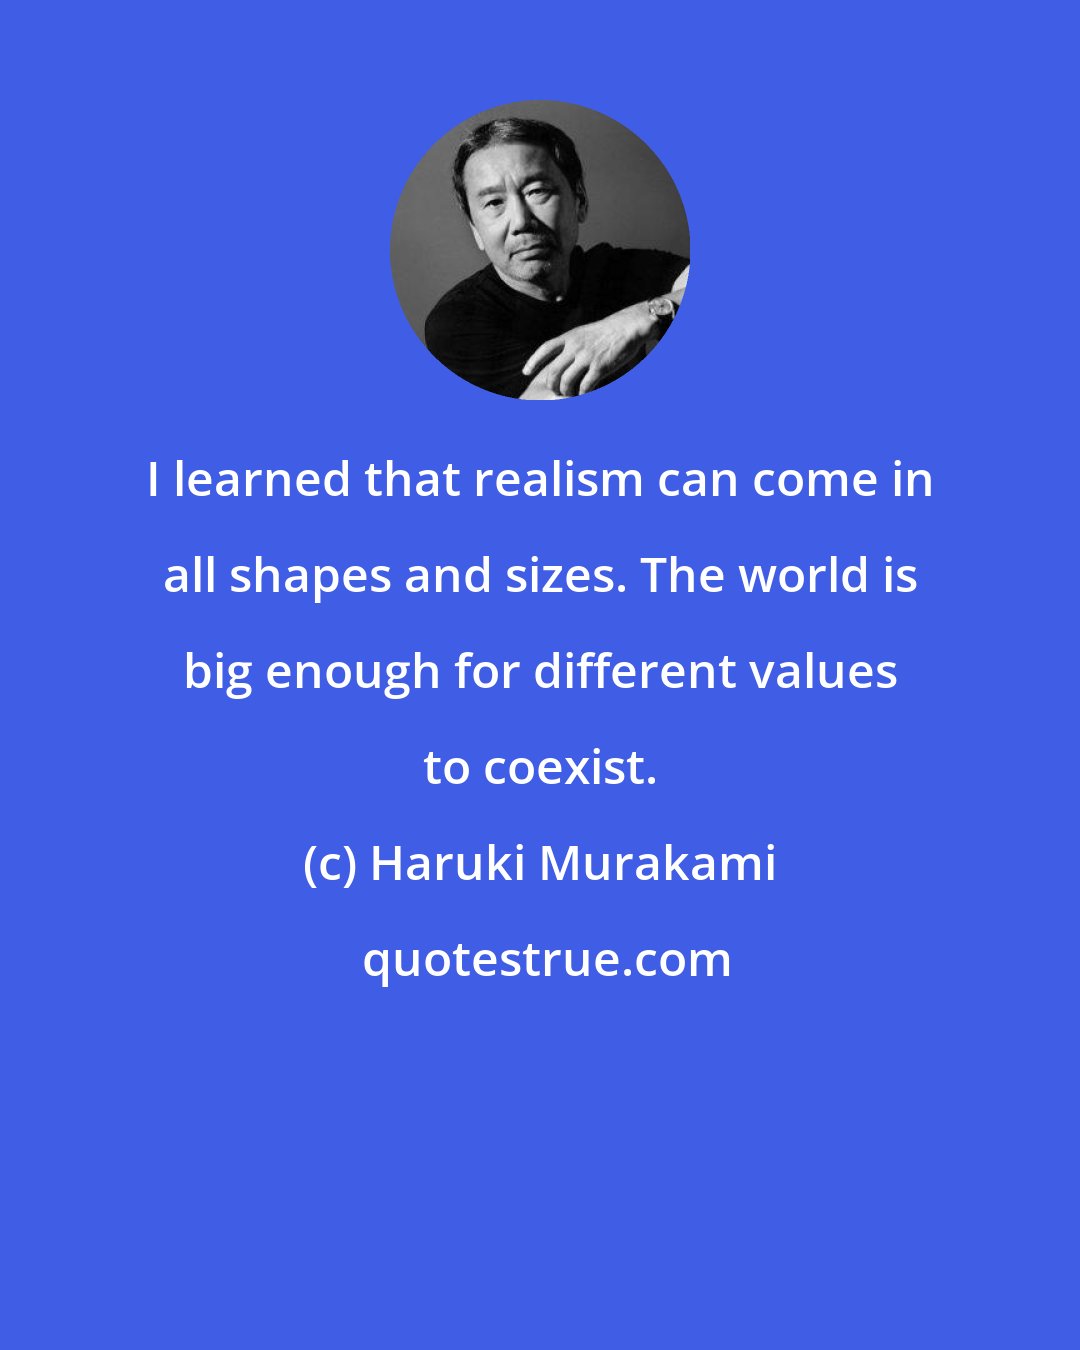 Haruki Murakami: I learned that realism can come in all shapes and sizes. The world is big enough for different values to coexist.